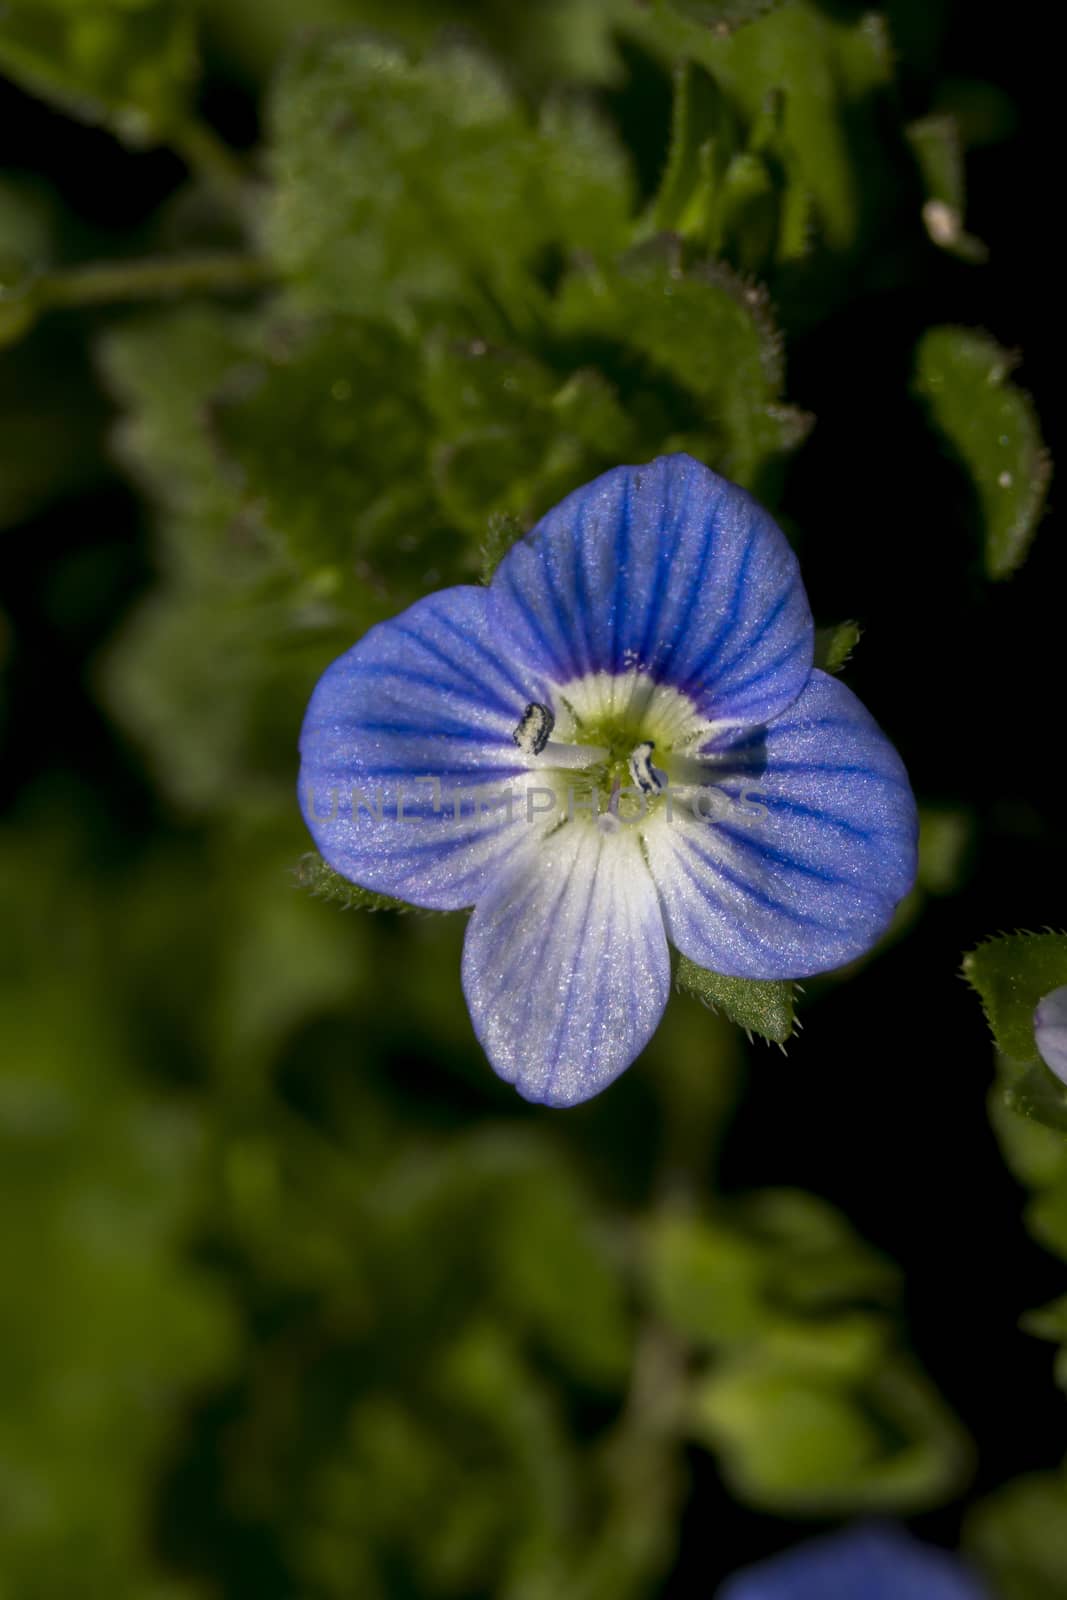 The Persian Veronica (Veronica persica) is a tiny flower.